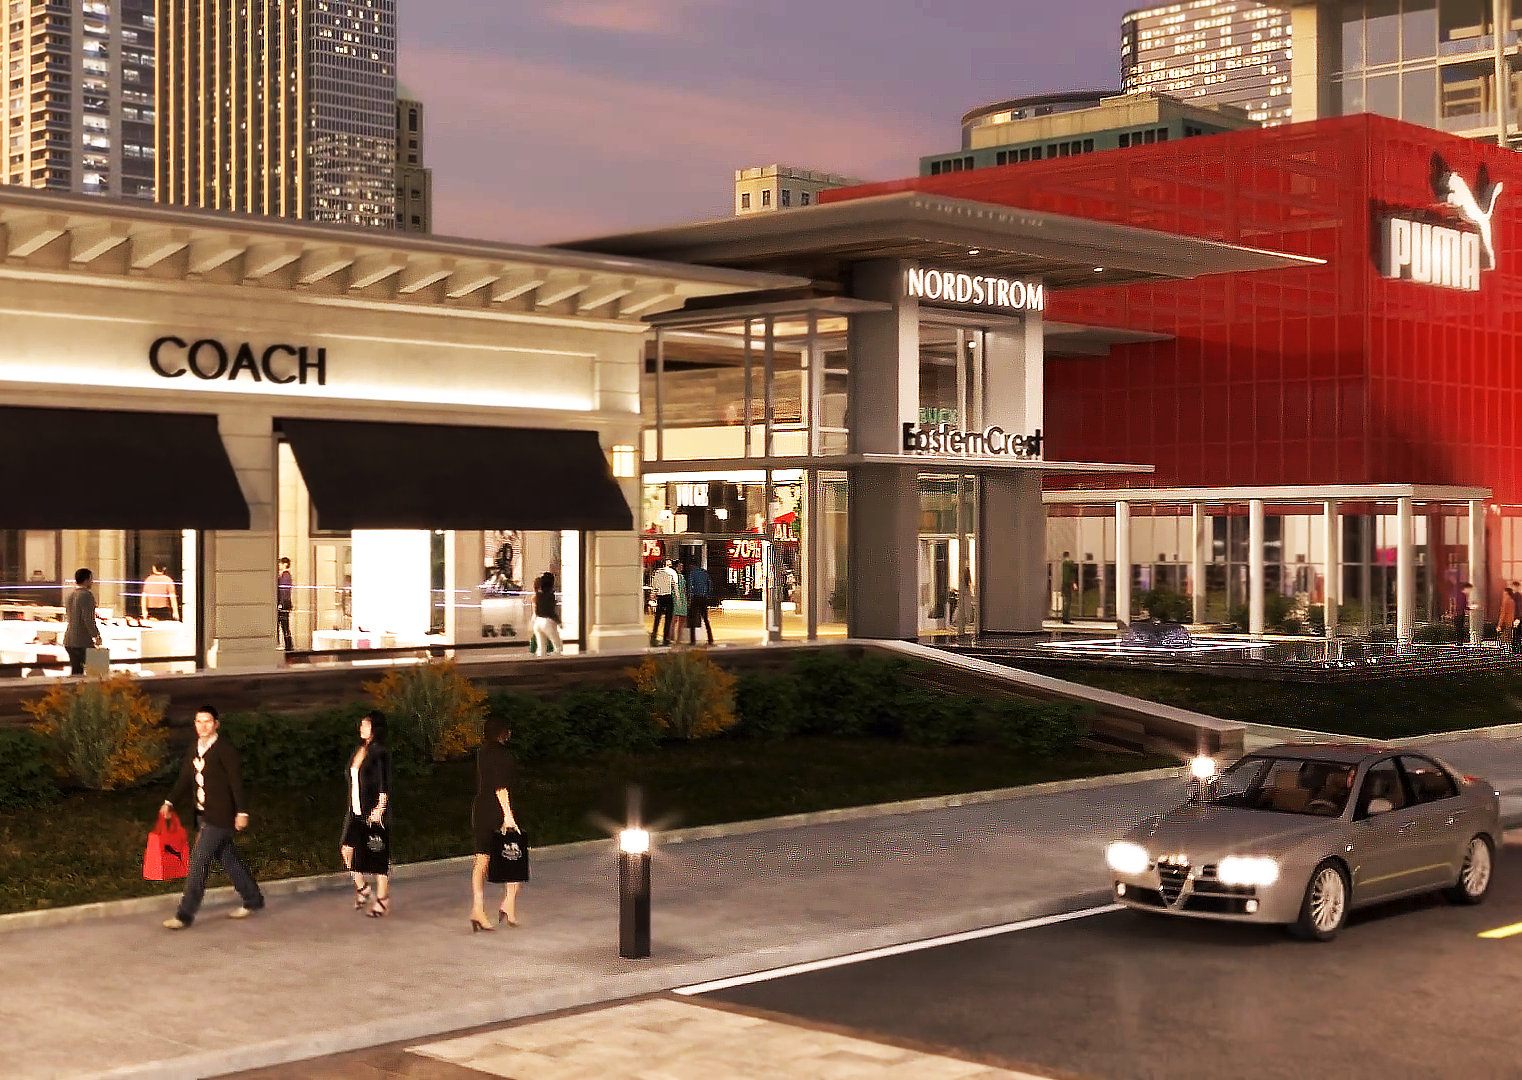 This is a 3D rendered image from Trinity's real estate renderings exhibiting the Summit Plaza Mall. This still shot displays a line of retail stores that will exist at the Summit Plaza Mall such as coach, Nordstrom, and Puma. #D rendered people and cars are featured in this image to replicate a realistic experience for viewers.